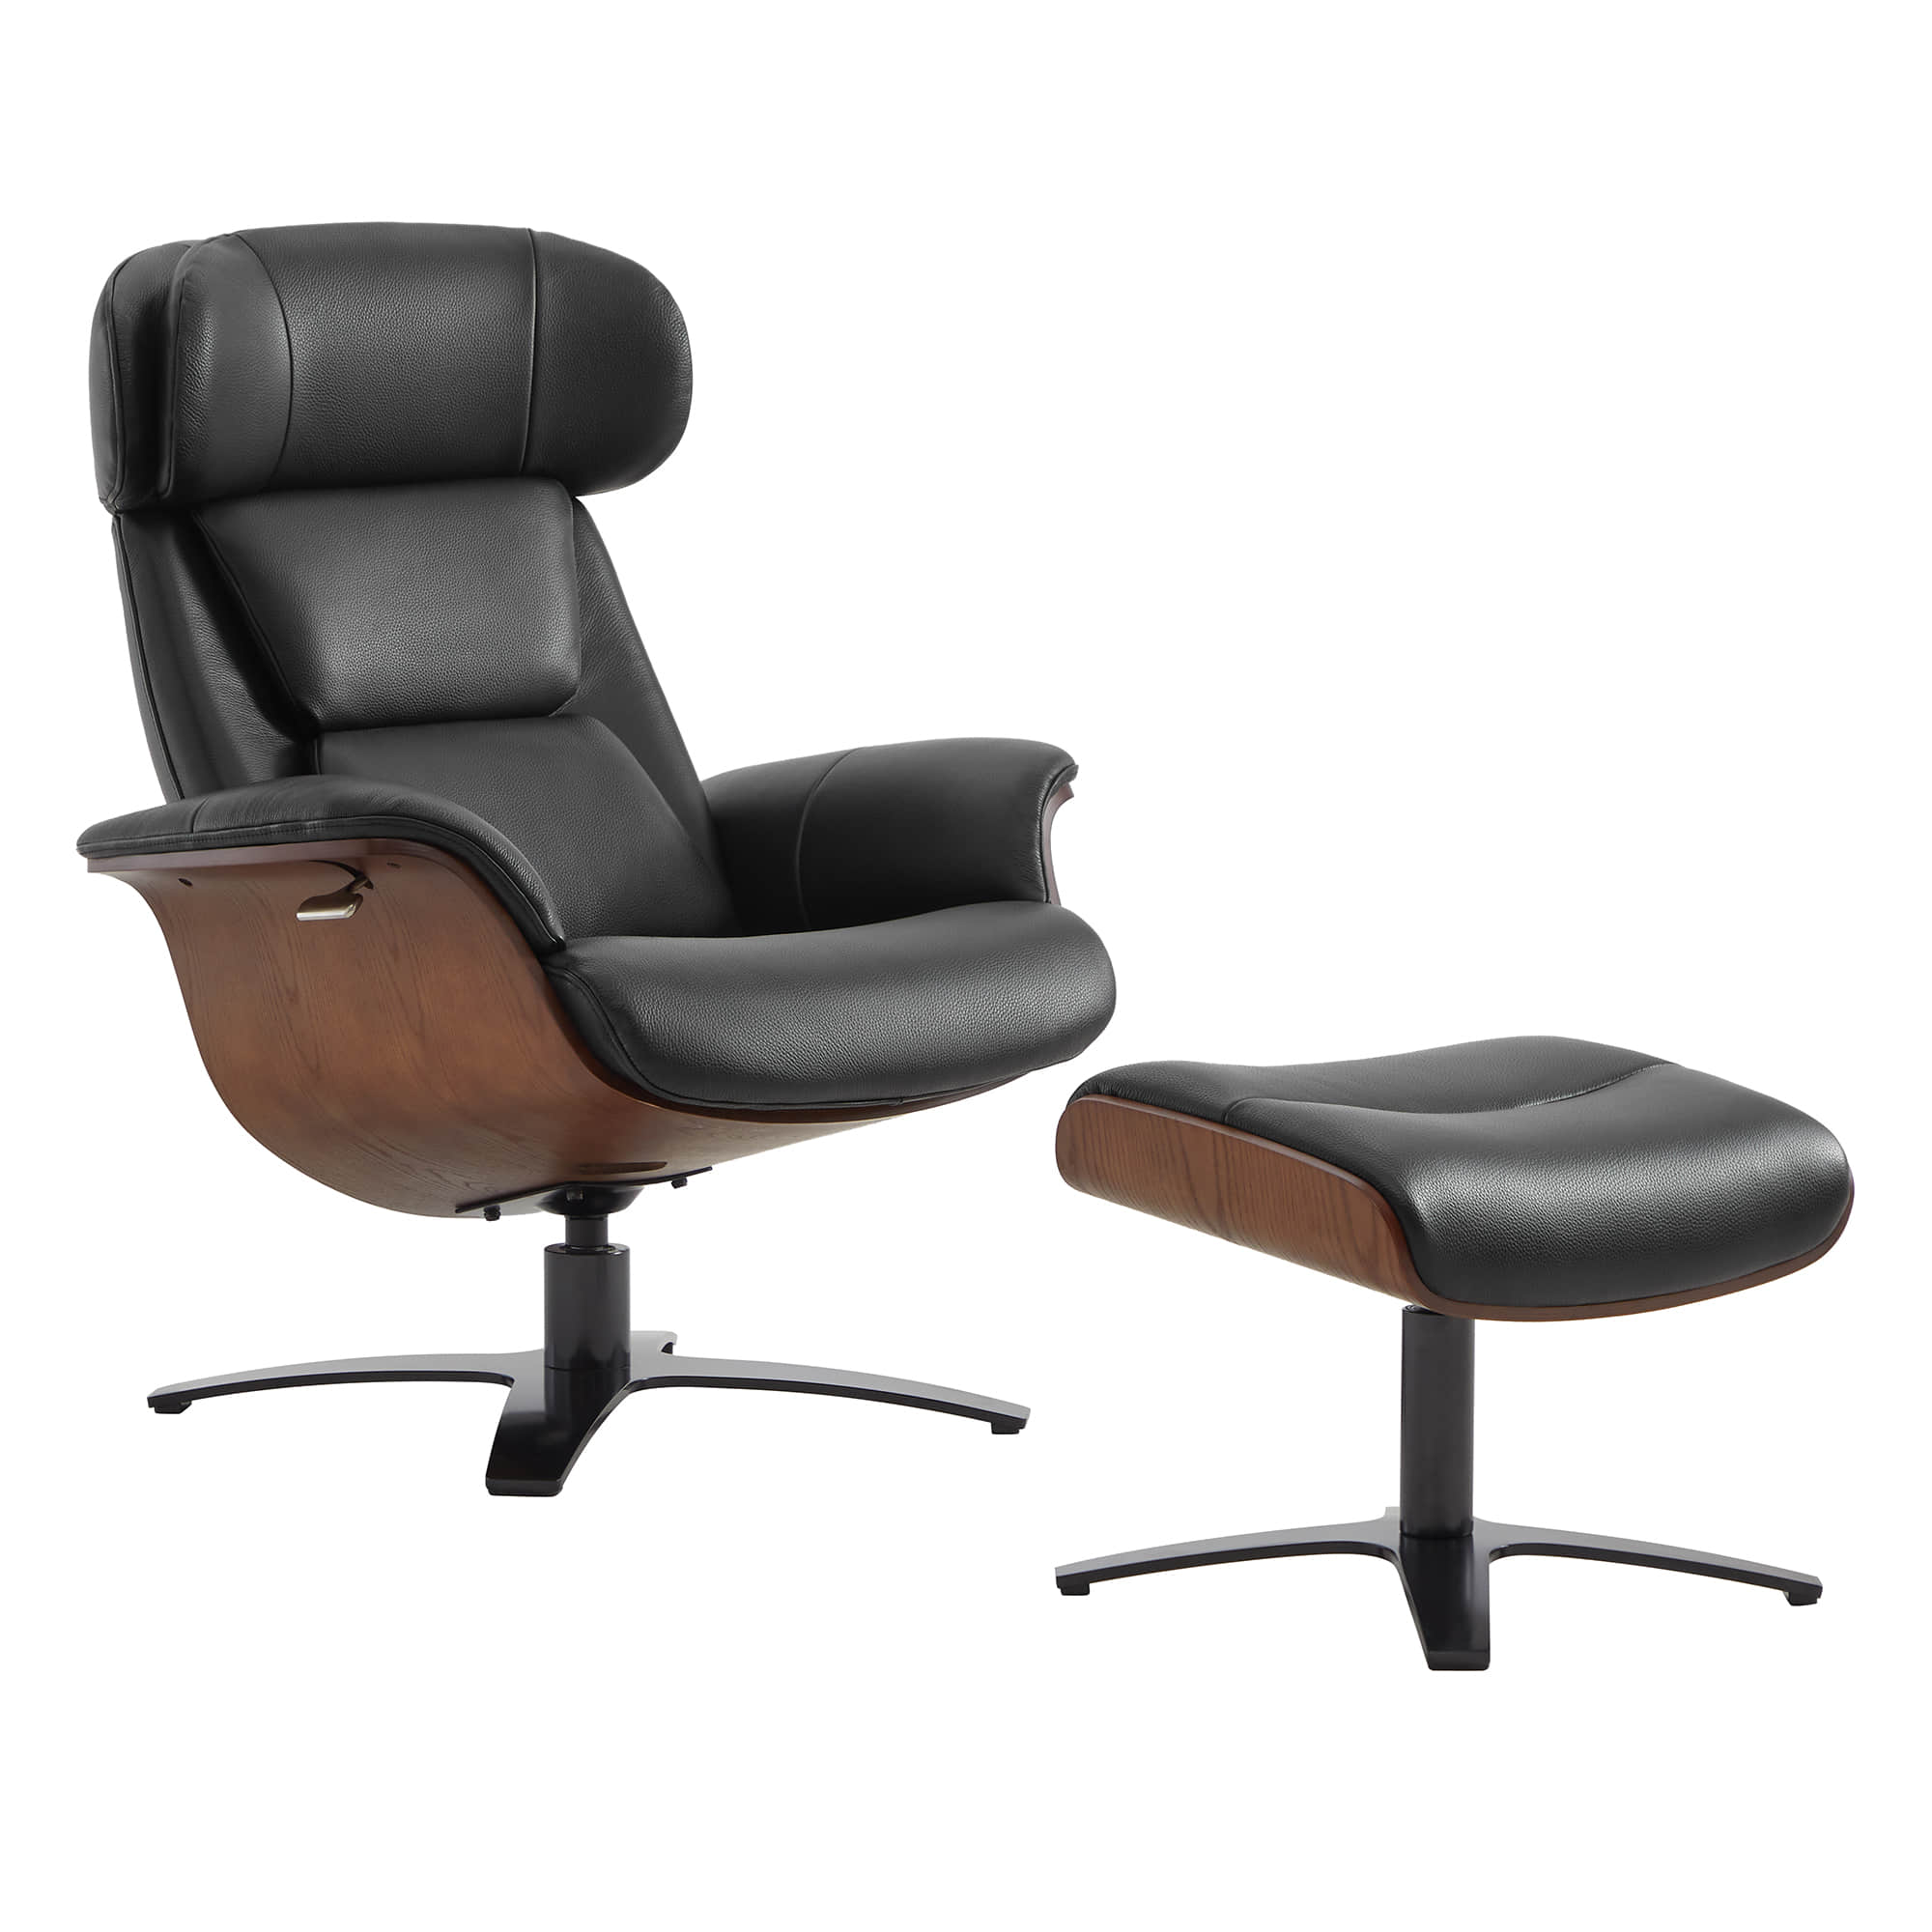 CHITA LIVING-Elvin Leather Recliner & Ottoman-Recliners-Genuine Top-grain Leather-Black-